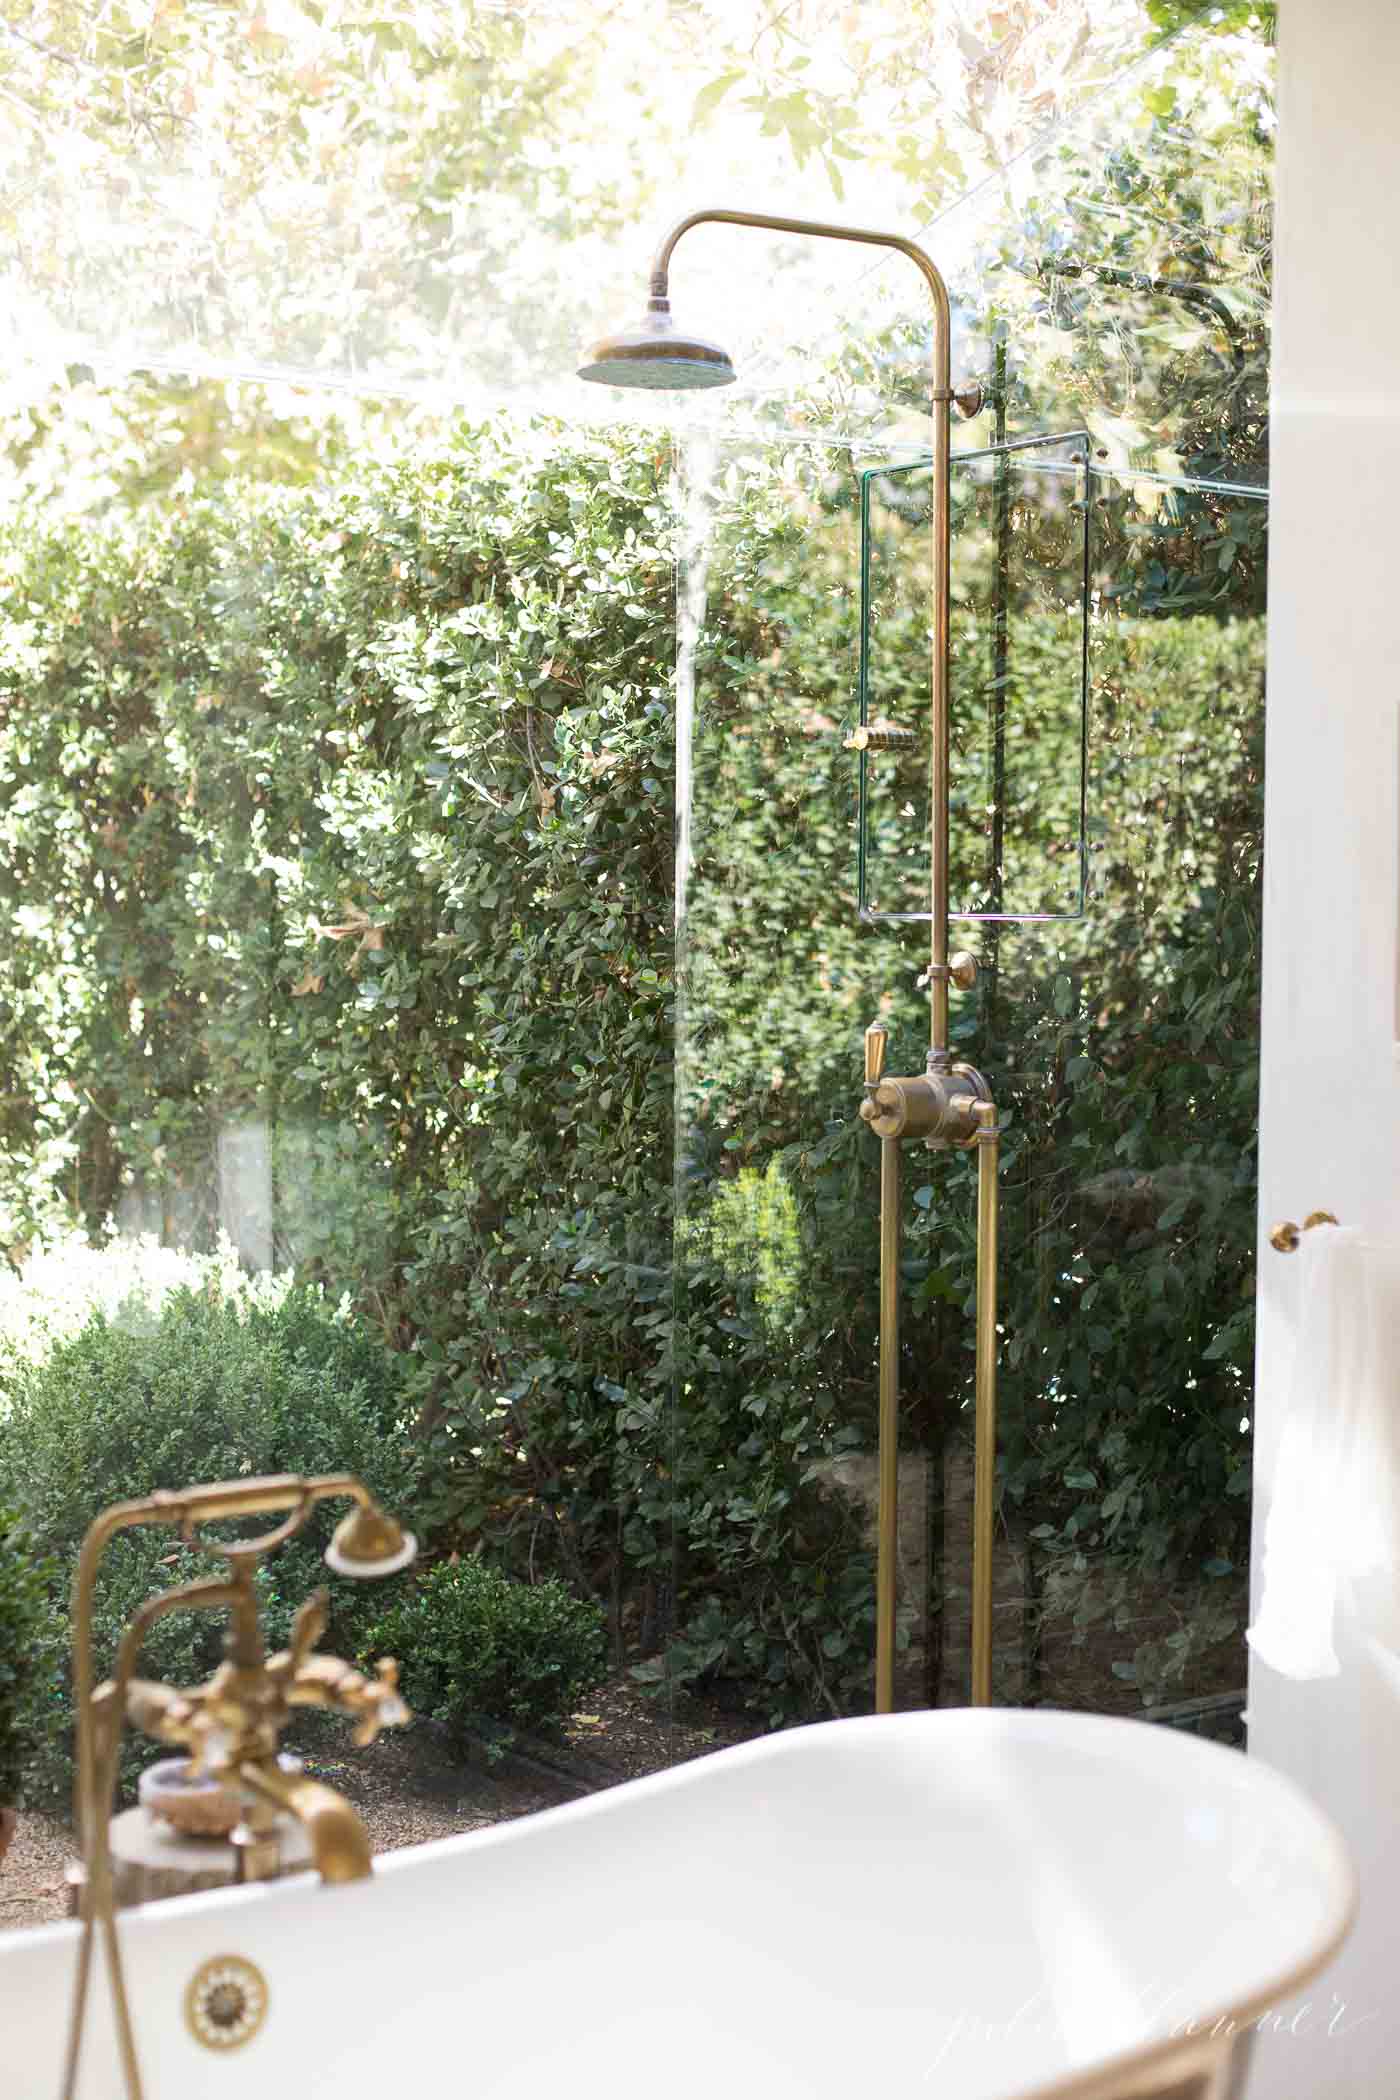 A glass enclosed shower with a brass shower head and bathtub faucet, feels as though its in the garden beyond.